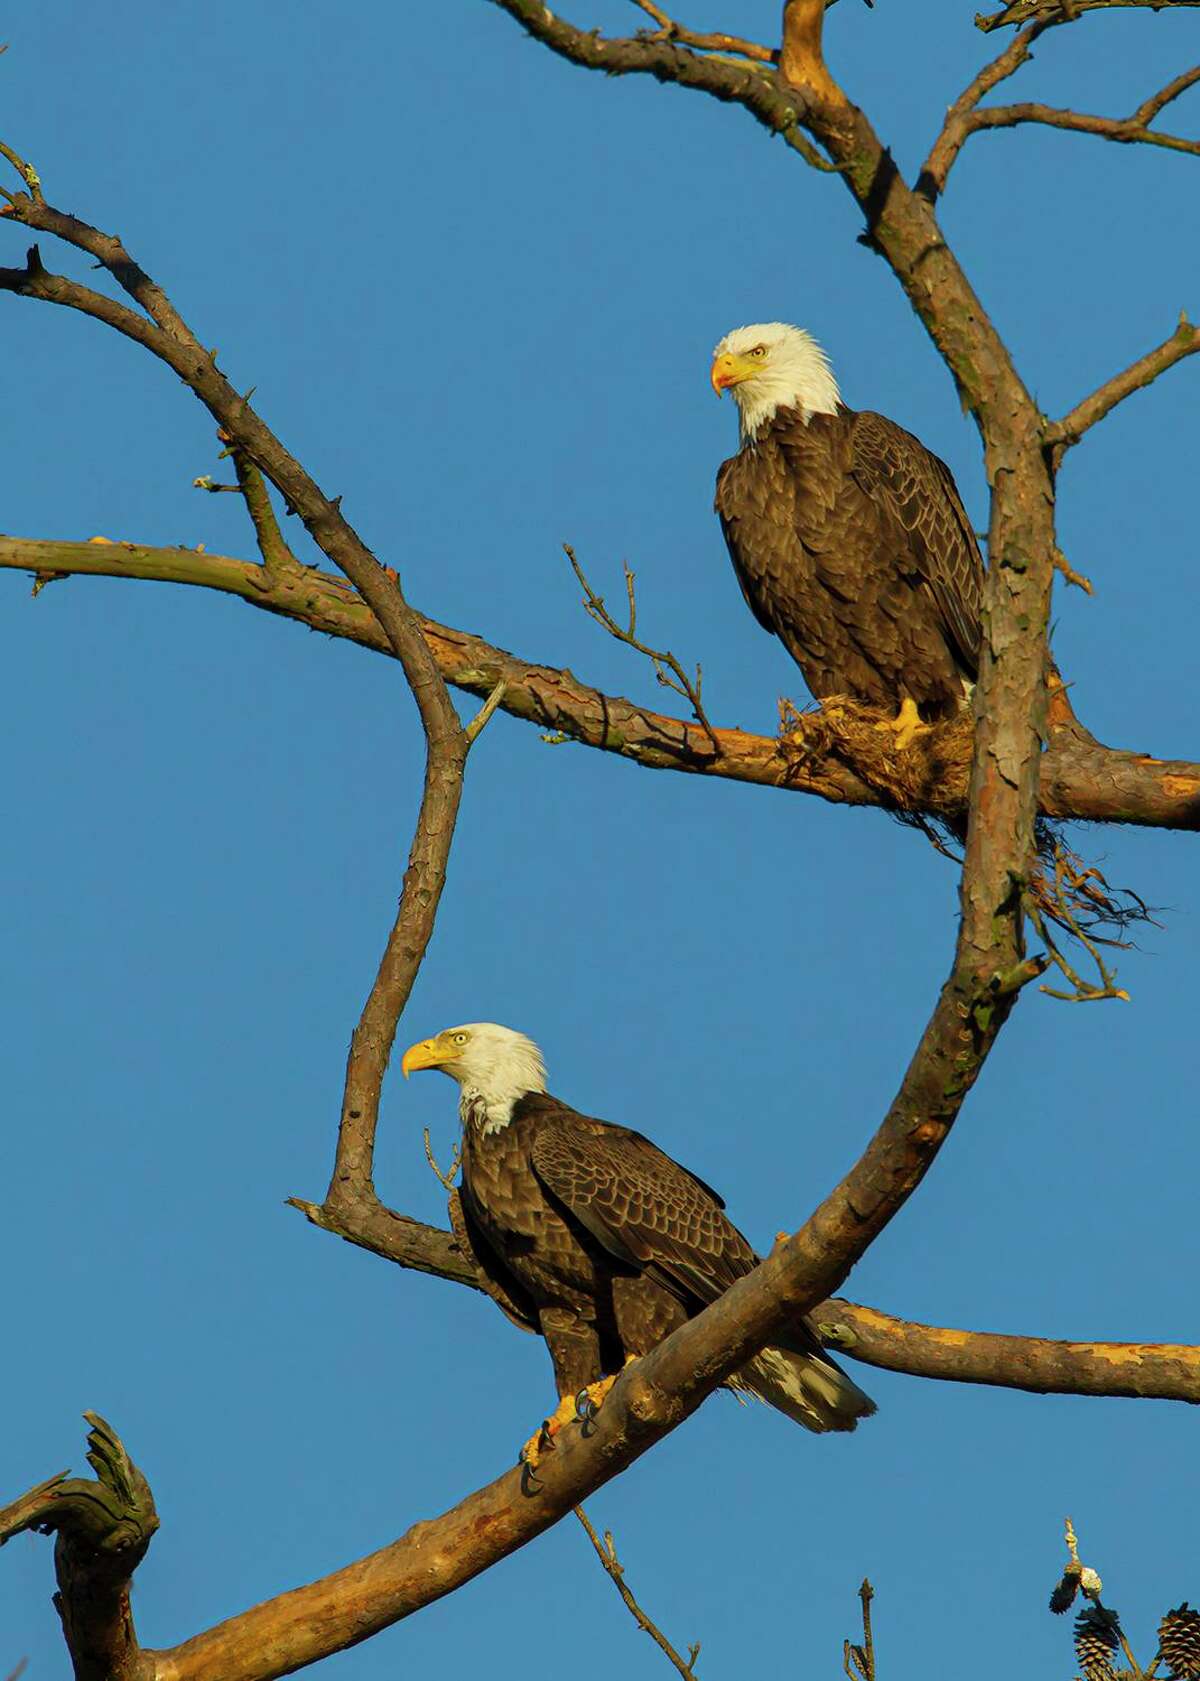 Houston Audubon Society seeks your nomination for the “Bird of Houston.” Should it be the bald eagle in honor of the Apollo 11 moon landing? Photo Credit: Kathy Adams Clark Restricted use.